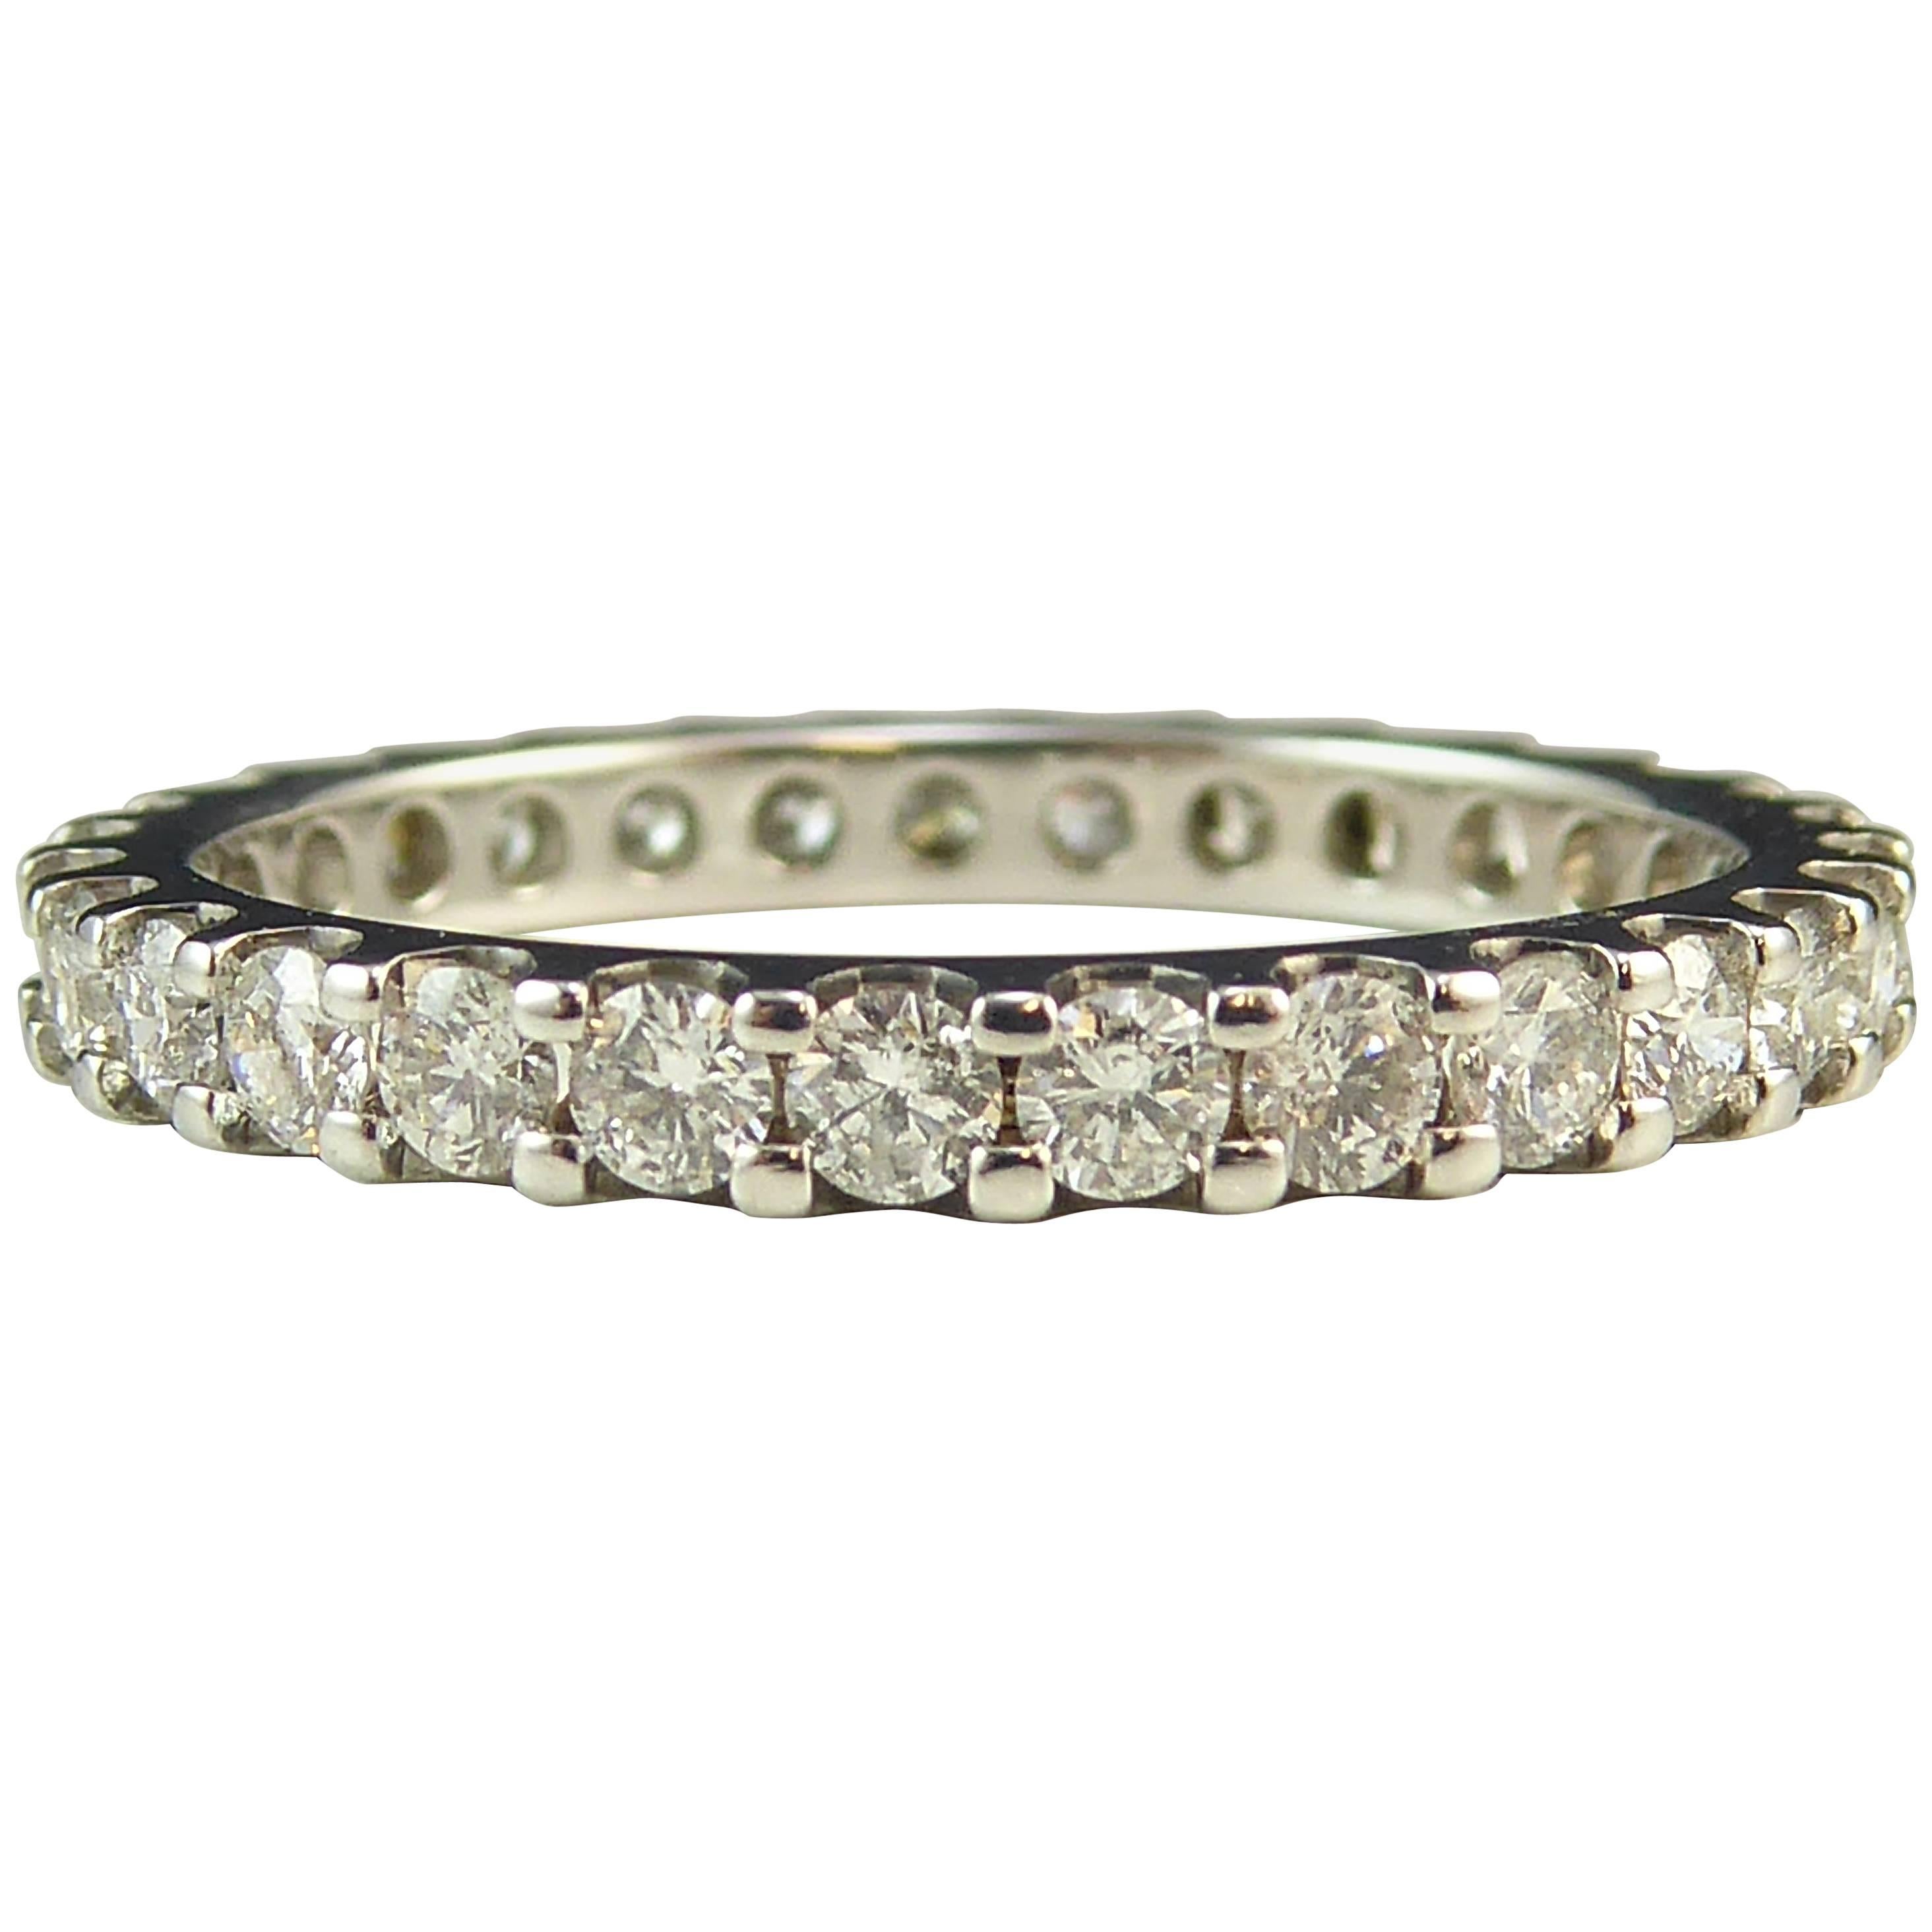 1.0 Carat Diamond Eternity Ring in White, Pre-Owned